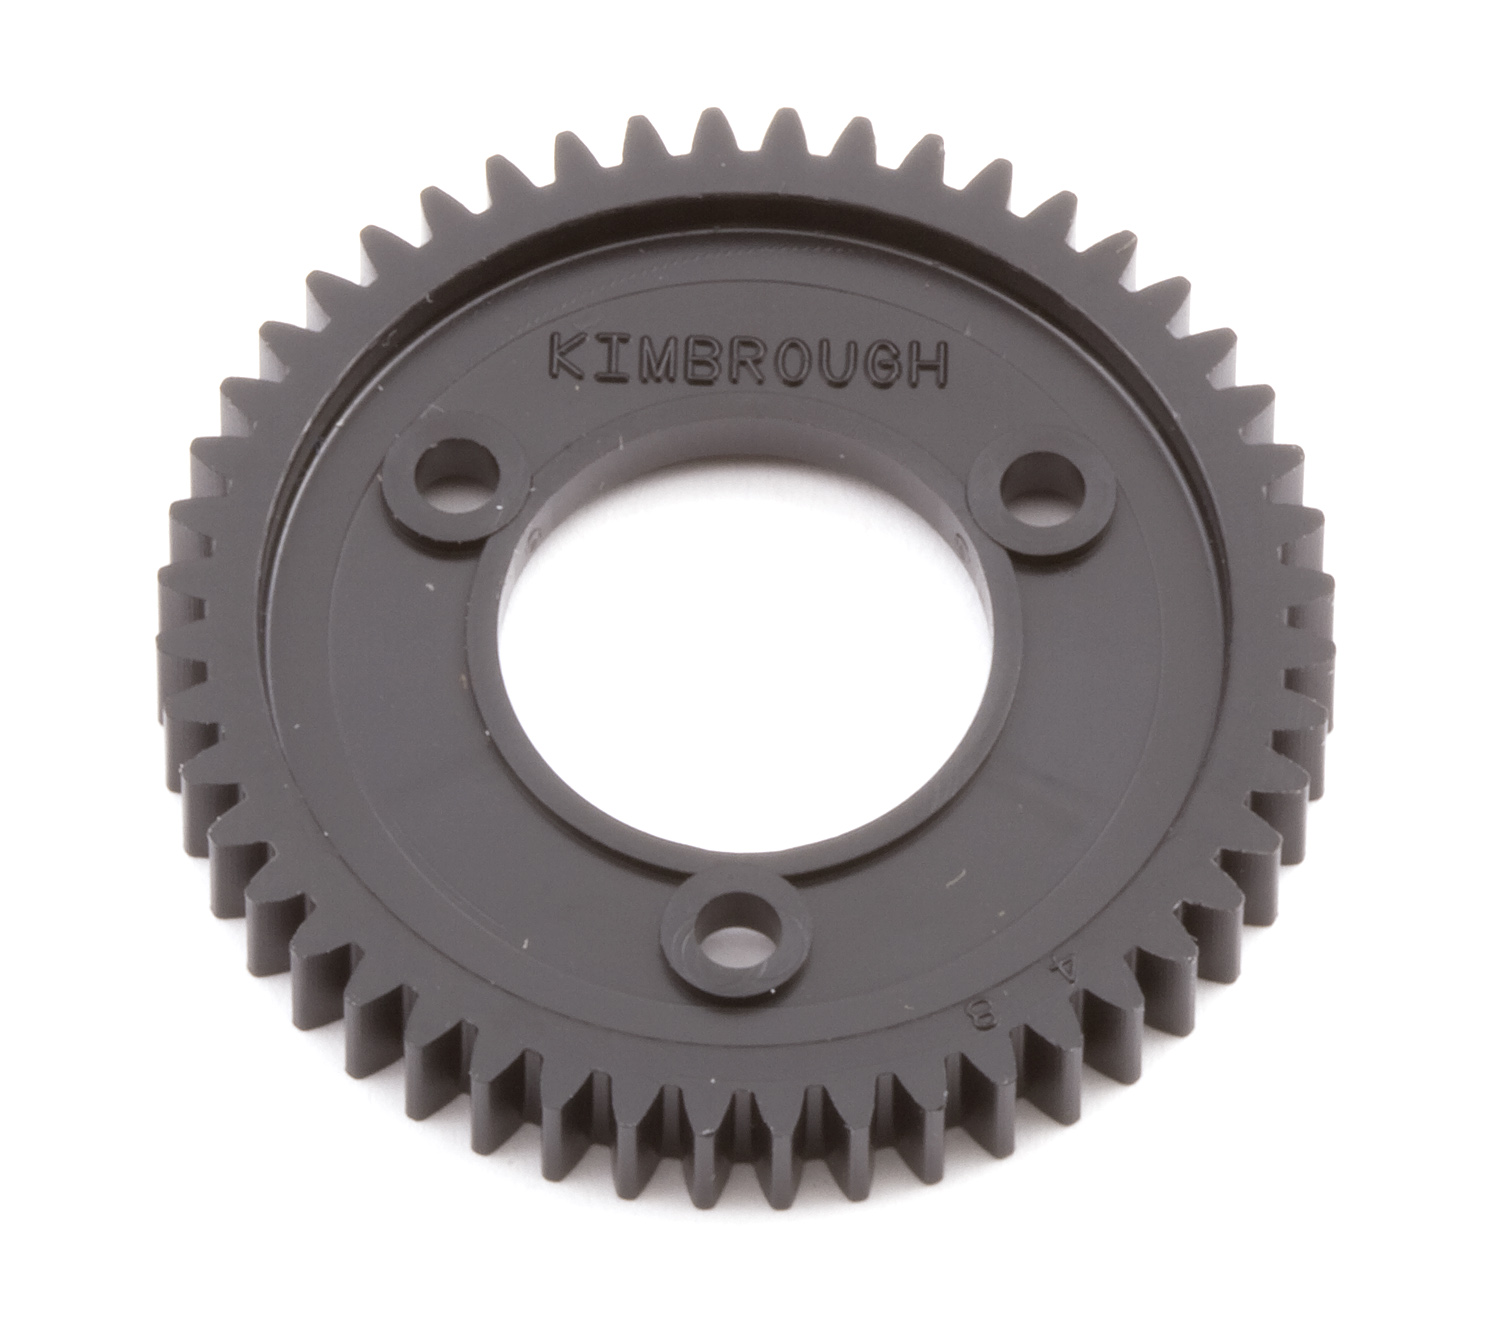 NTC3 Kimbrough Spur Gear, 48T 32P, 2nd